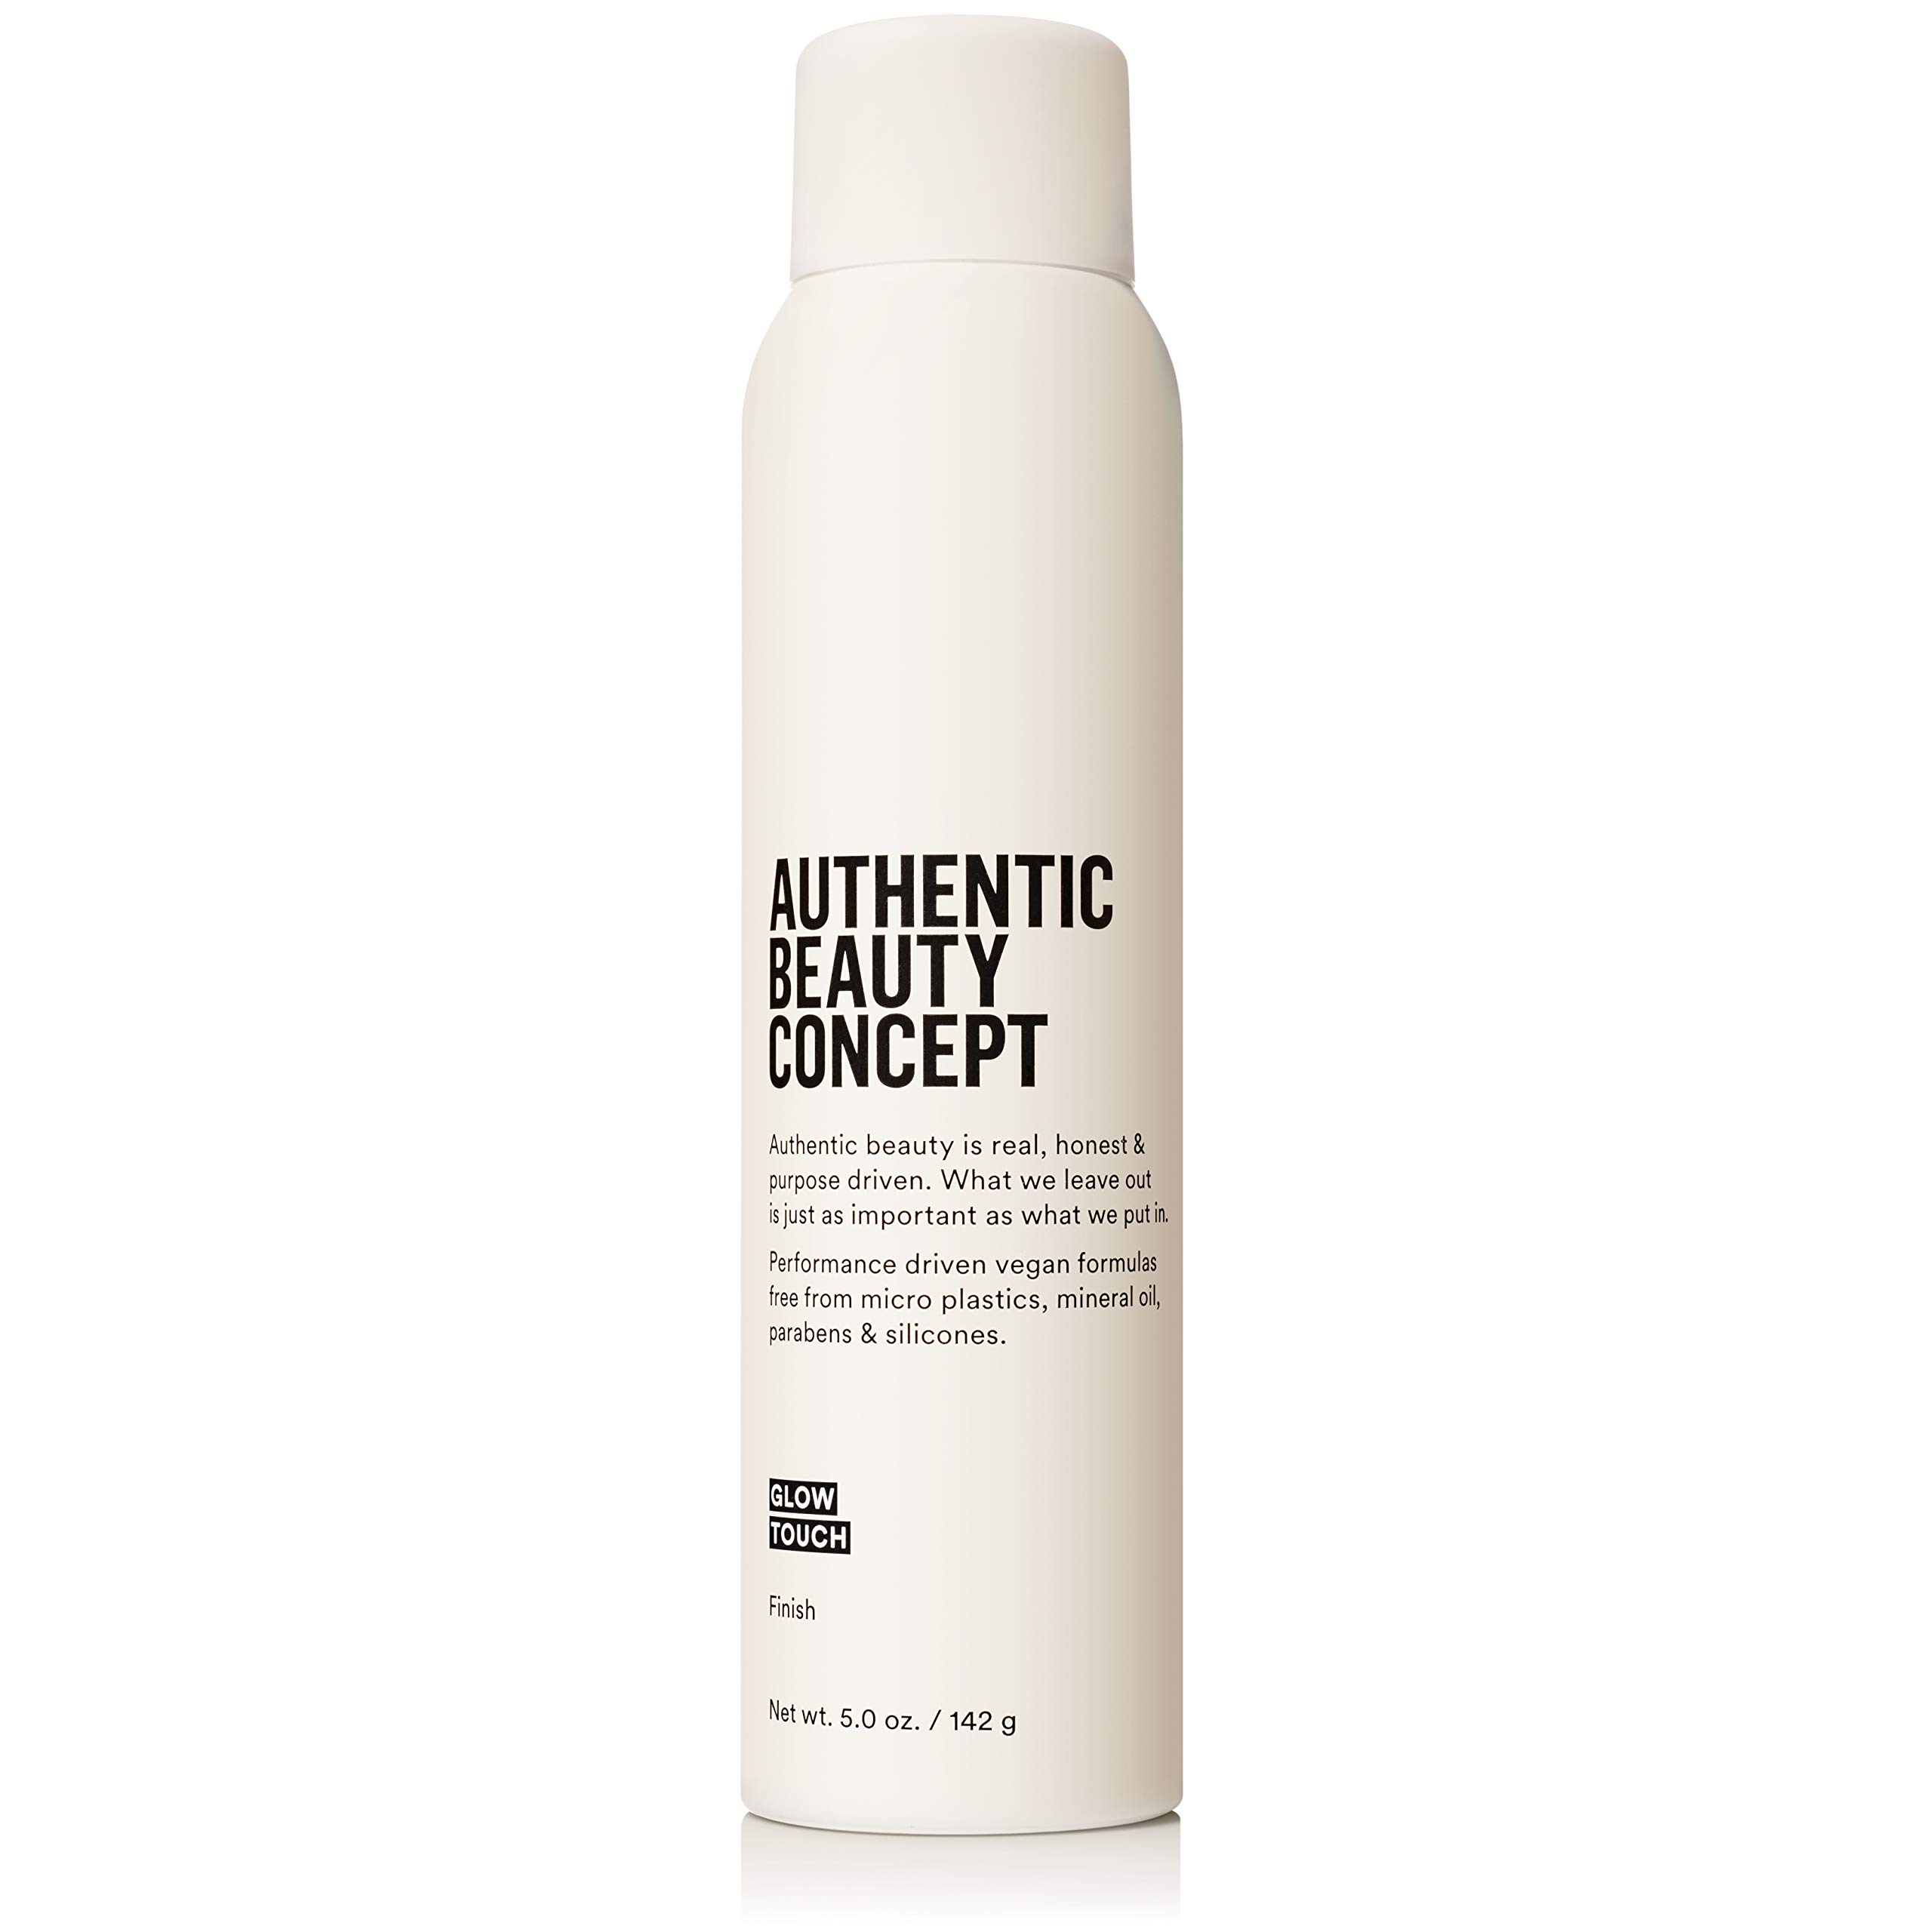 Authentic Beauty Con Glow Touch | Finishing Spray | Shine Spray | Soft & Smooth Finish | All Hair Types | Vegan & Cruelty-free | Silicone-free | 5 oz